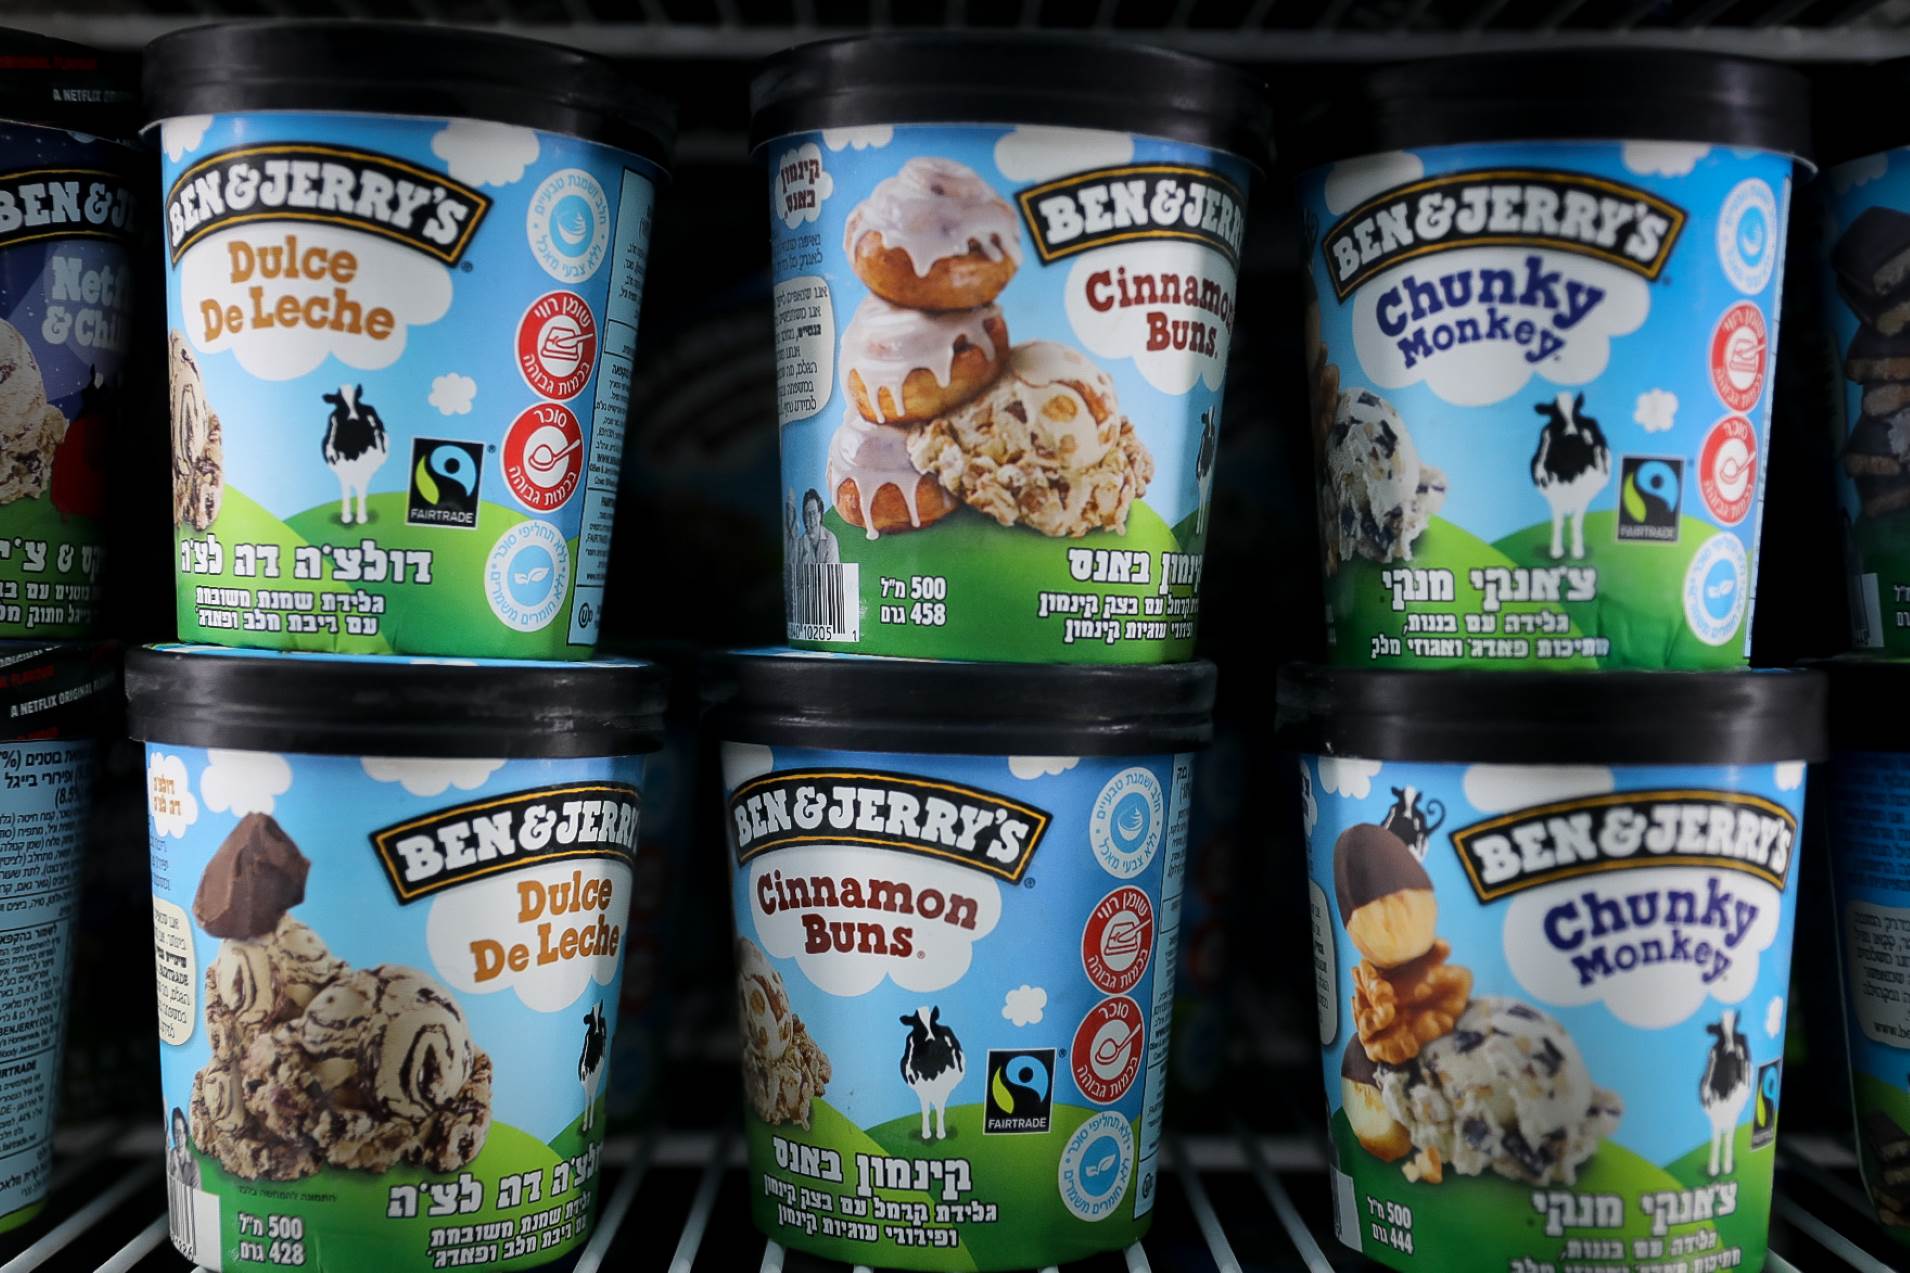 15-ben-and-jerry-facts